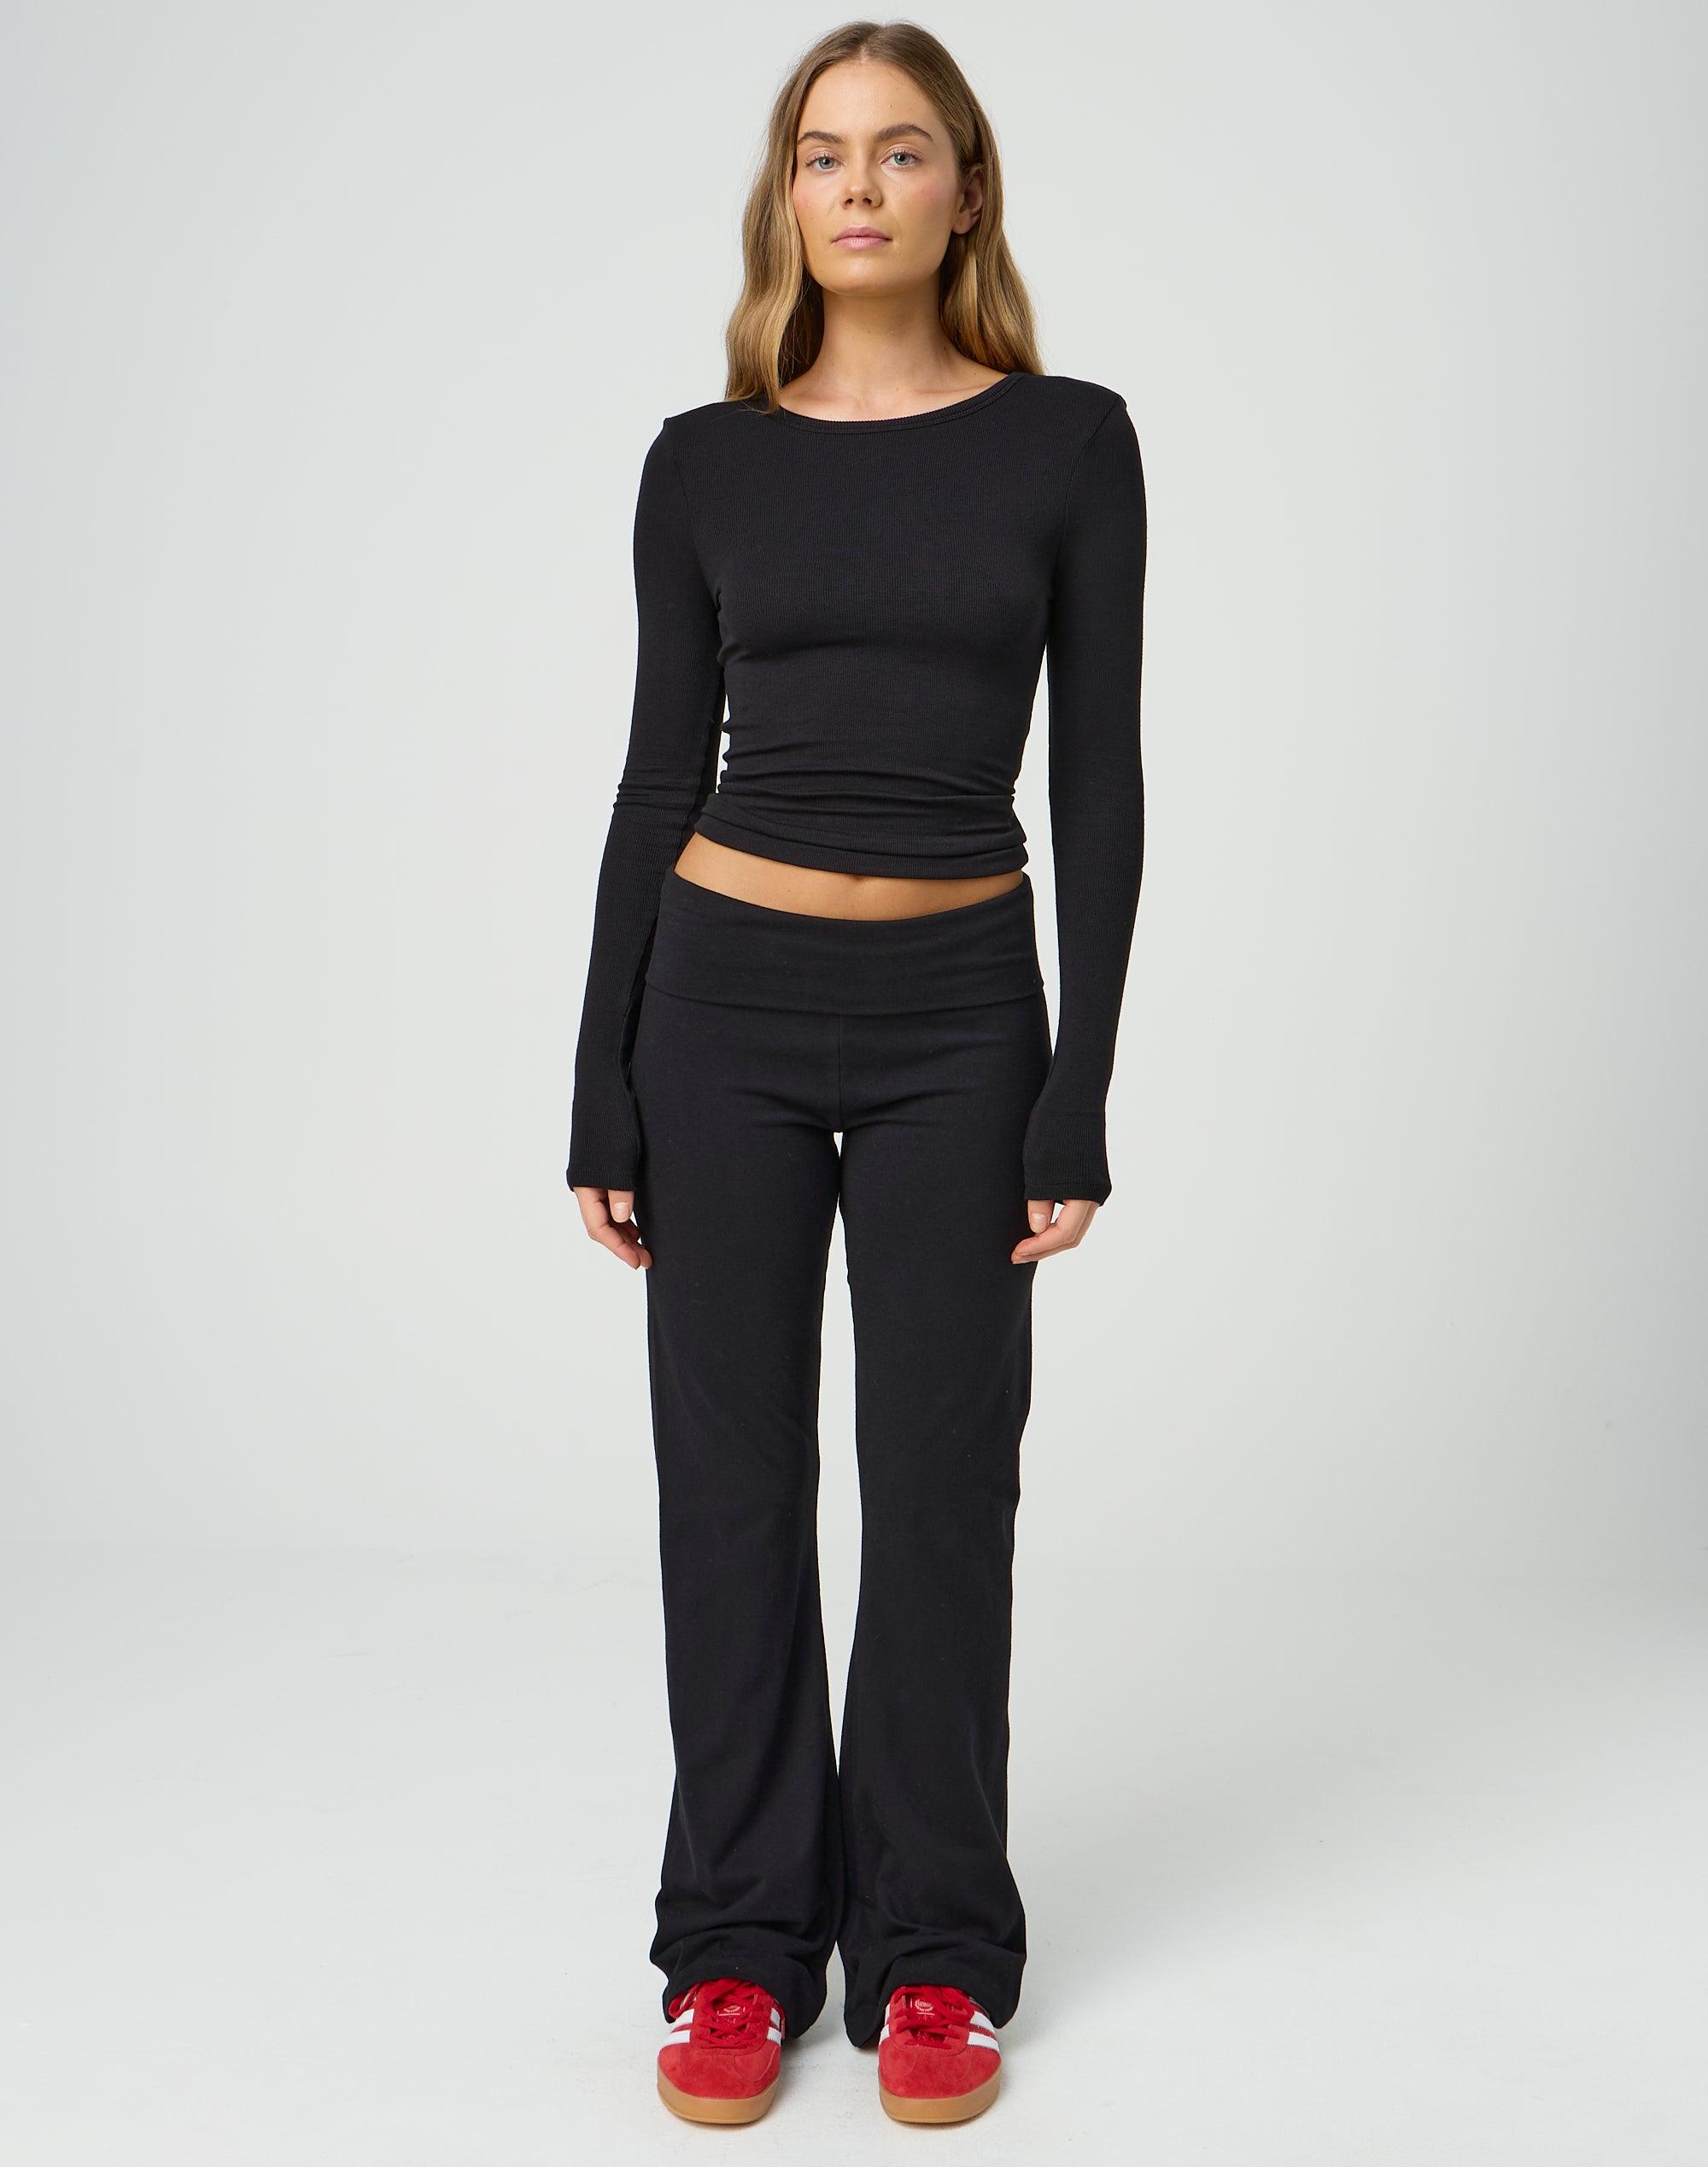 https://www.glassons.com/content/products/co-lilly-foldover-pant-black-front-pw145653cot.jpg